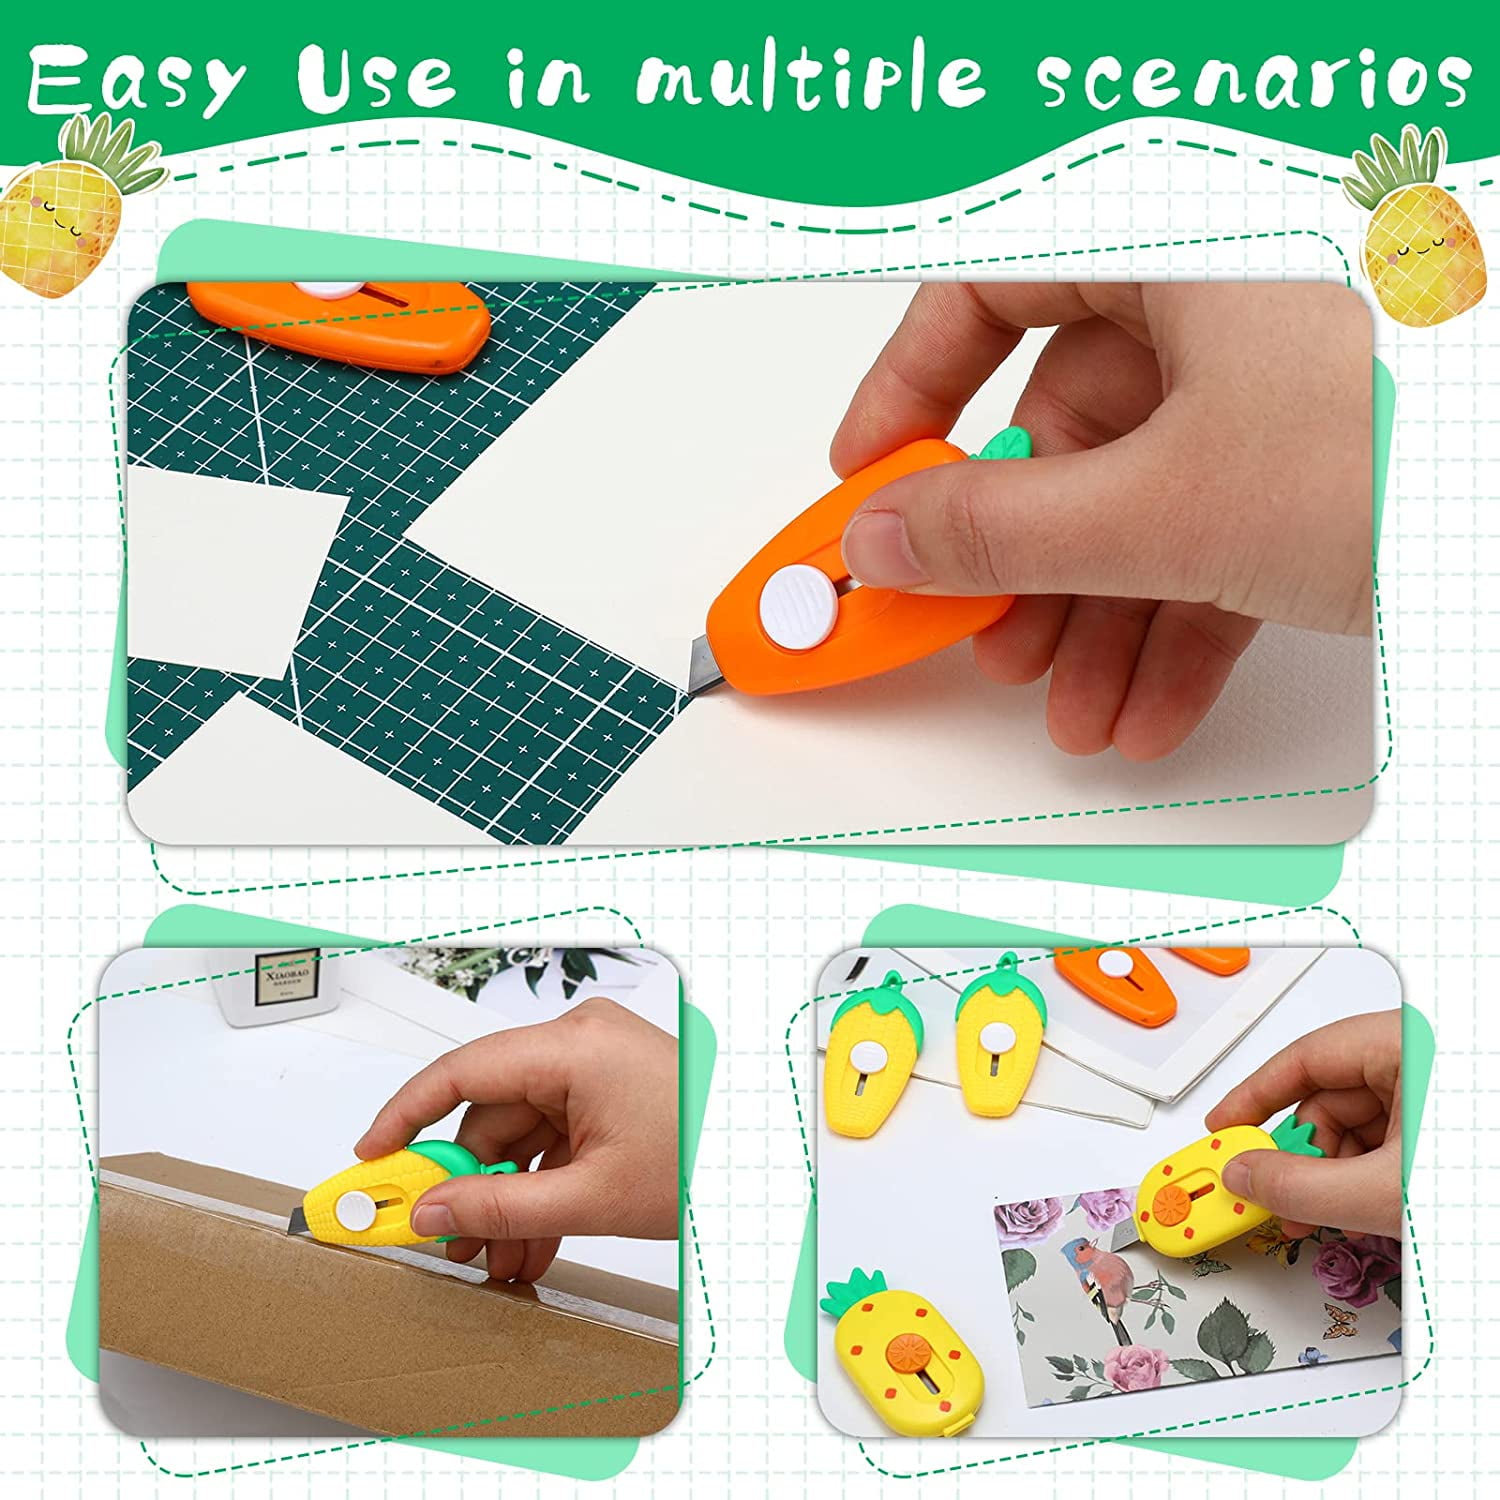 Dropship 1pc Cute Mini Love Heart Utility Knife, Paper Cutter, Art Knife,  Box Cutter, School, Office Supply, Cutting Tool, Student Stationery, Gift  to Sell Online at a Lower Price